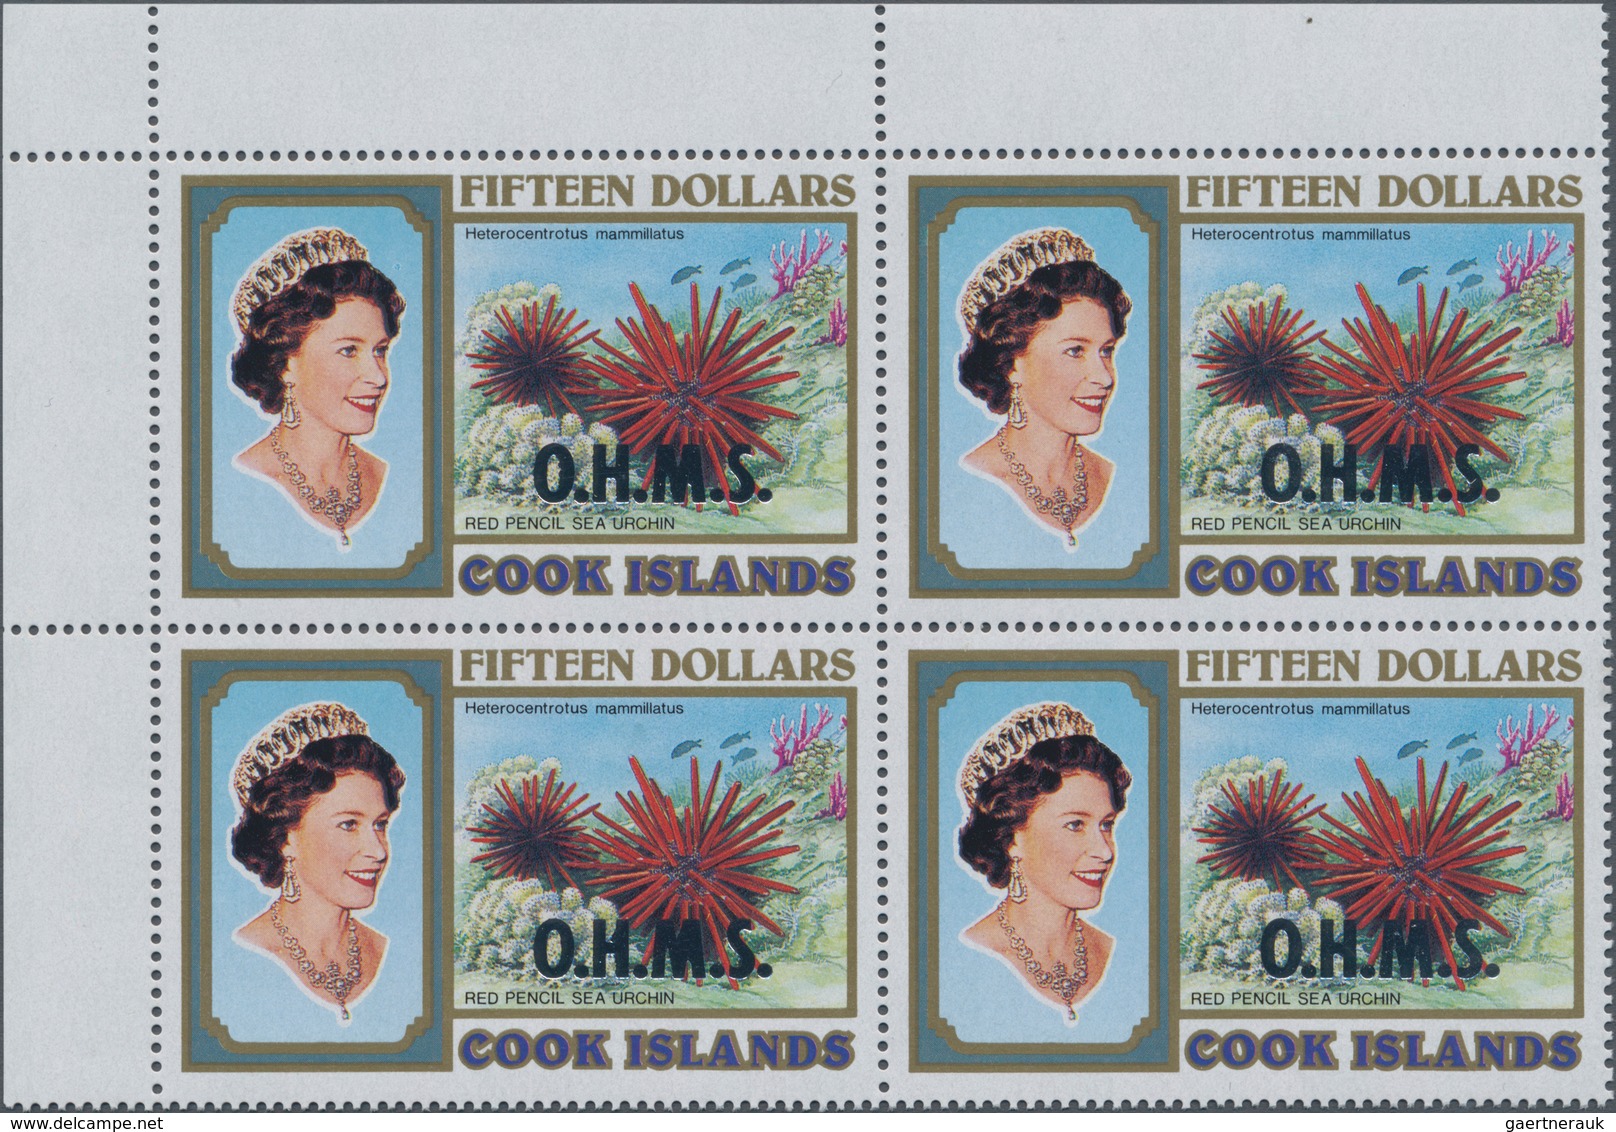 Cook-Inseln: 1990 (approx.), Michel Number 1408 With Overprint O.H.M.S. In Left Upper Corner Block O - Cook Islands